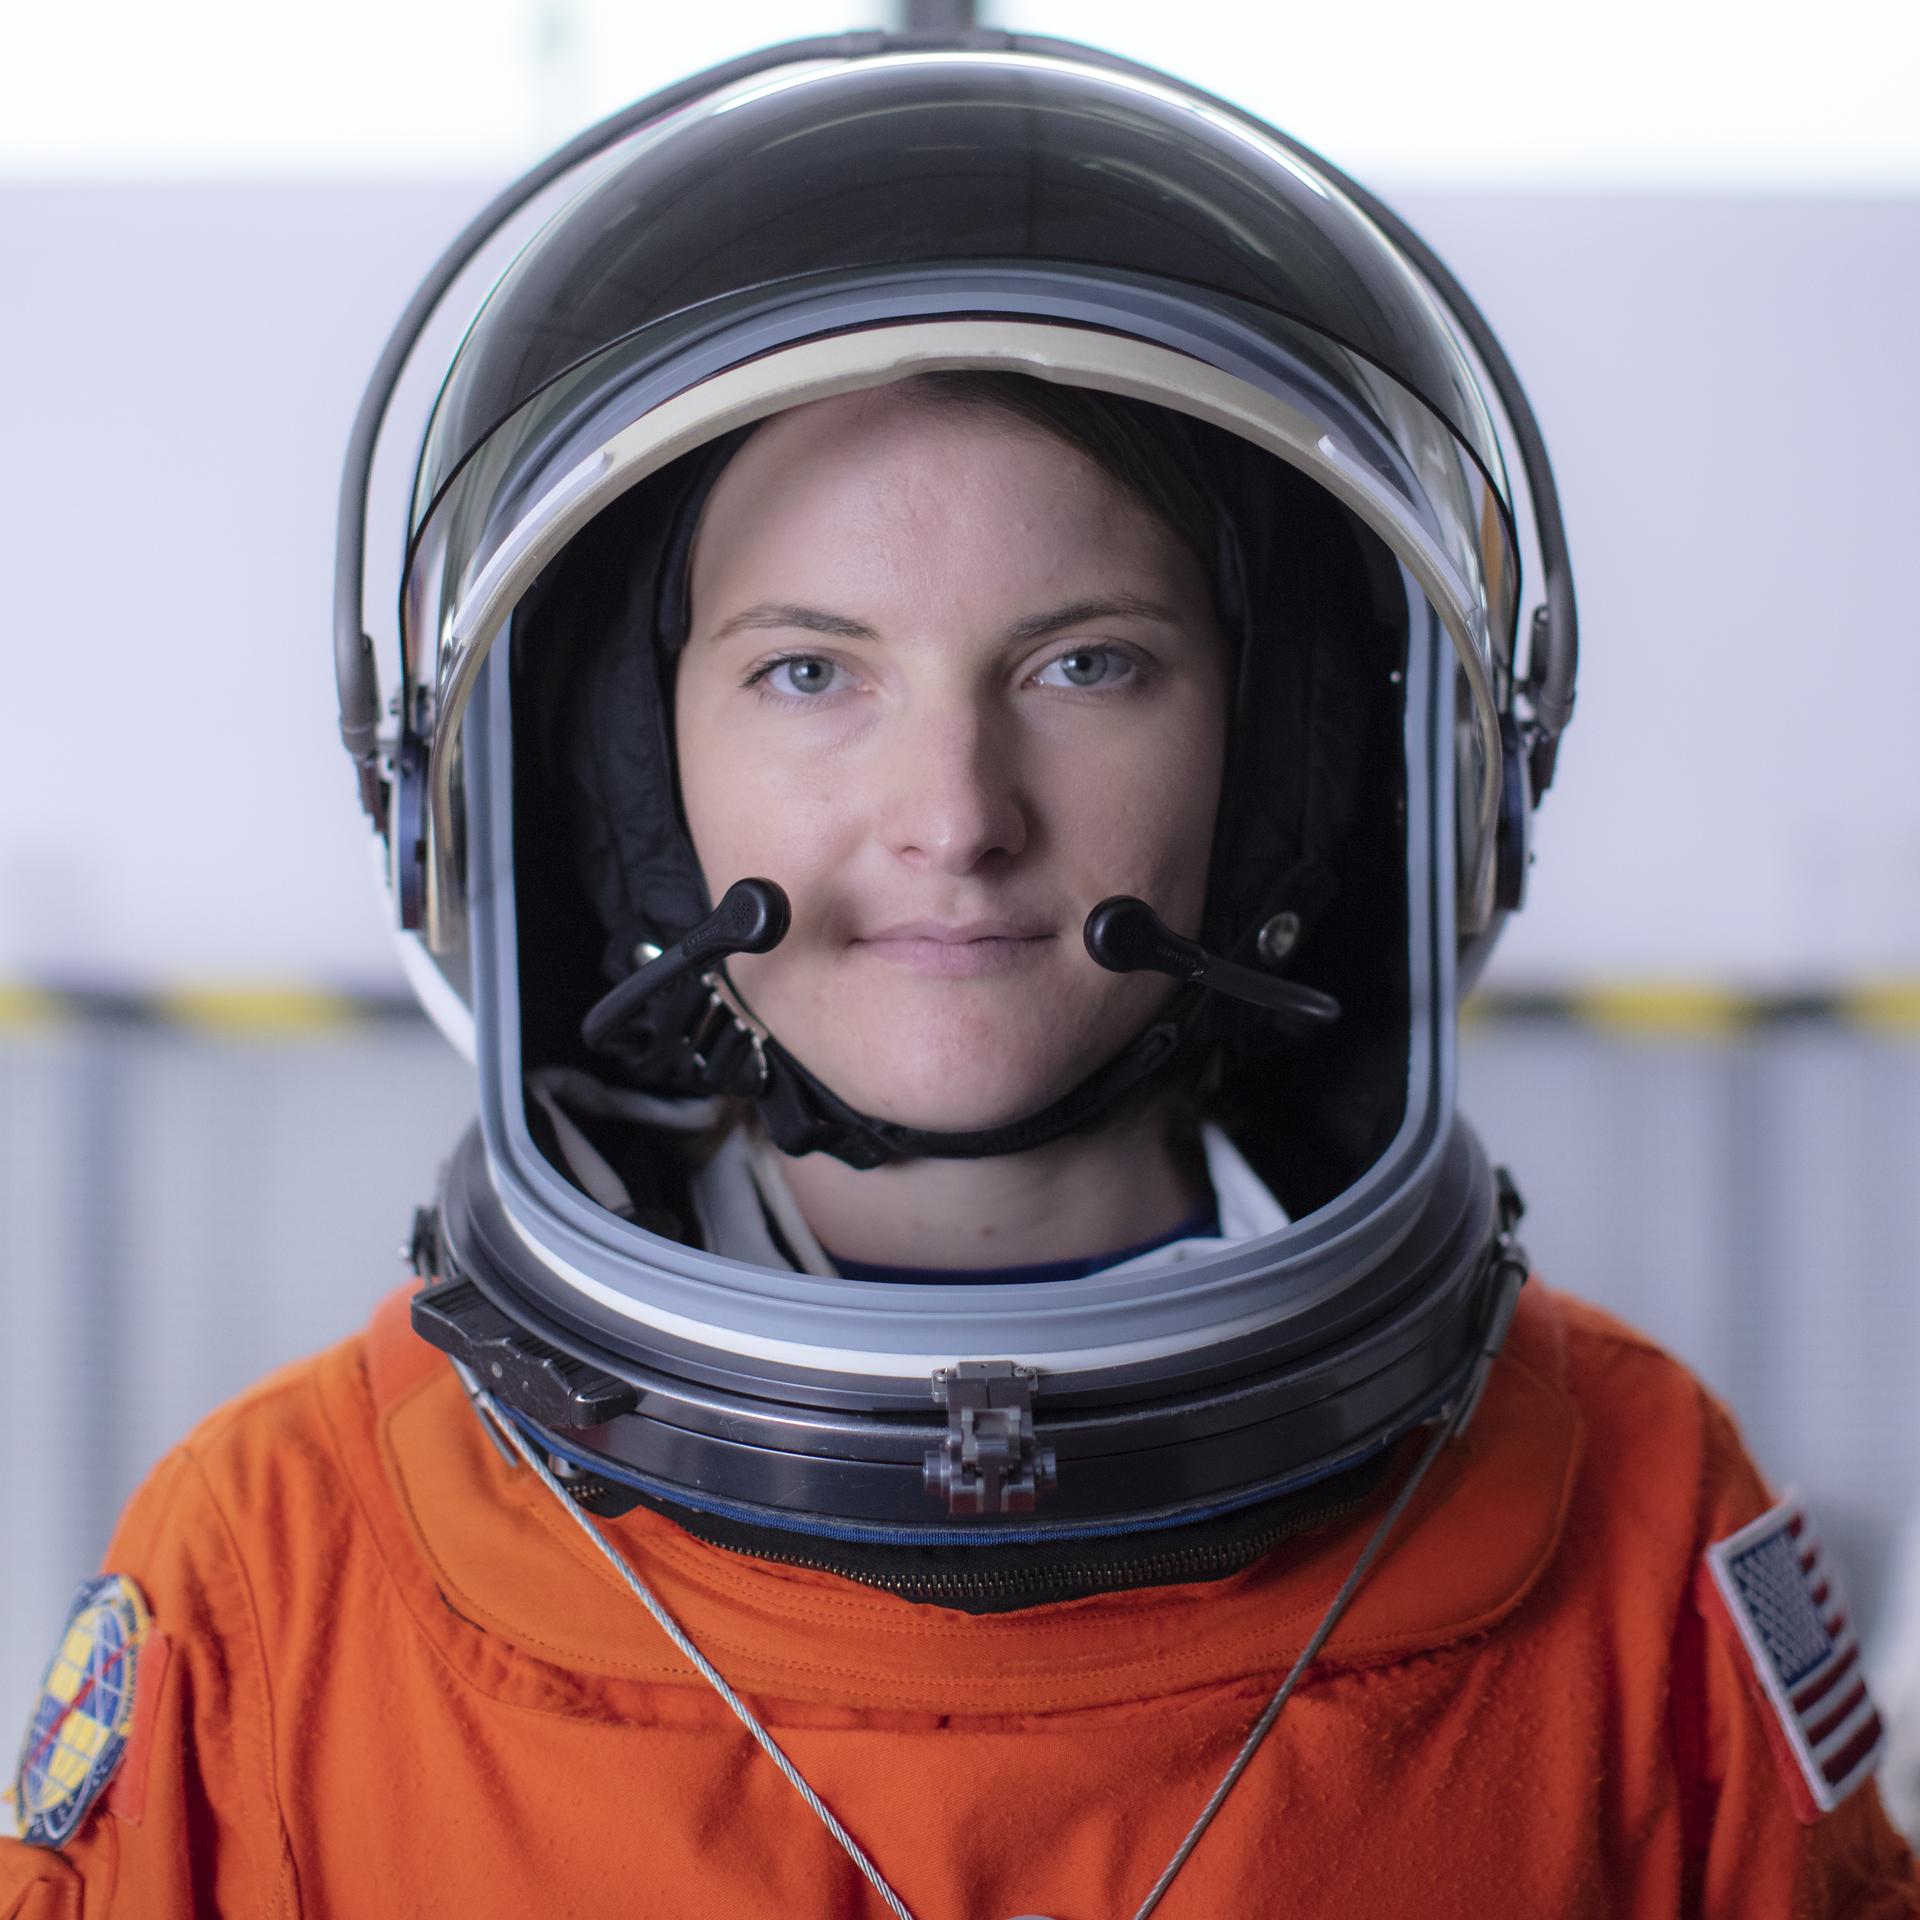 NASA astronaut candidate Kayla Barron poses for a portrait after donning her spacesuit, Friday, July 12, 2019 at NASA's Johnson Space Center in Houston, Texas. 